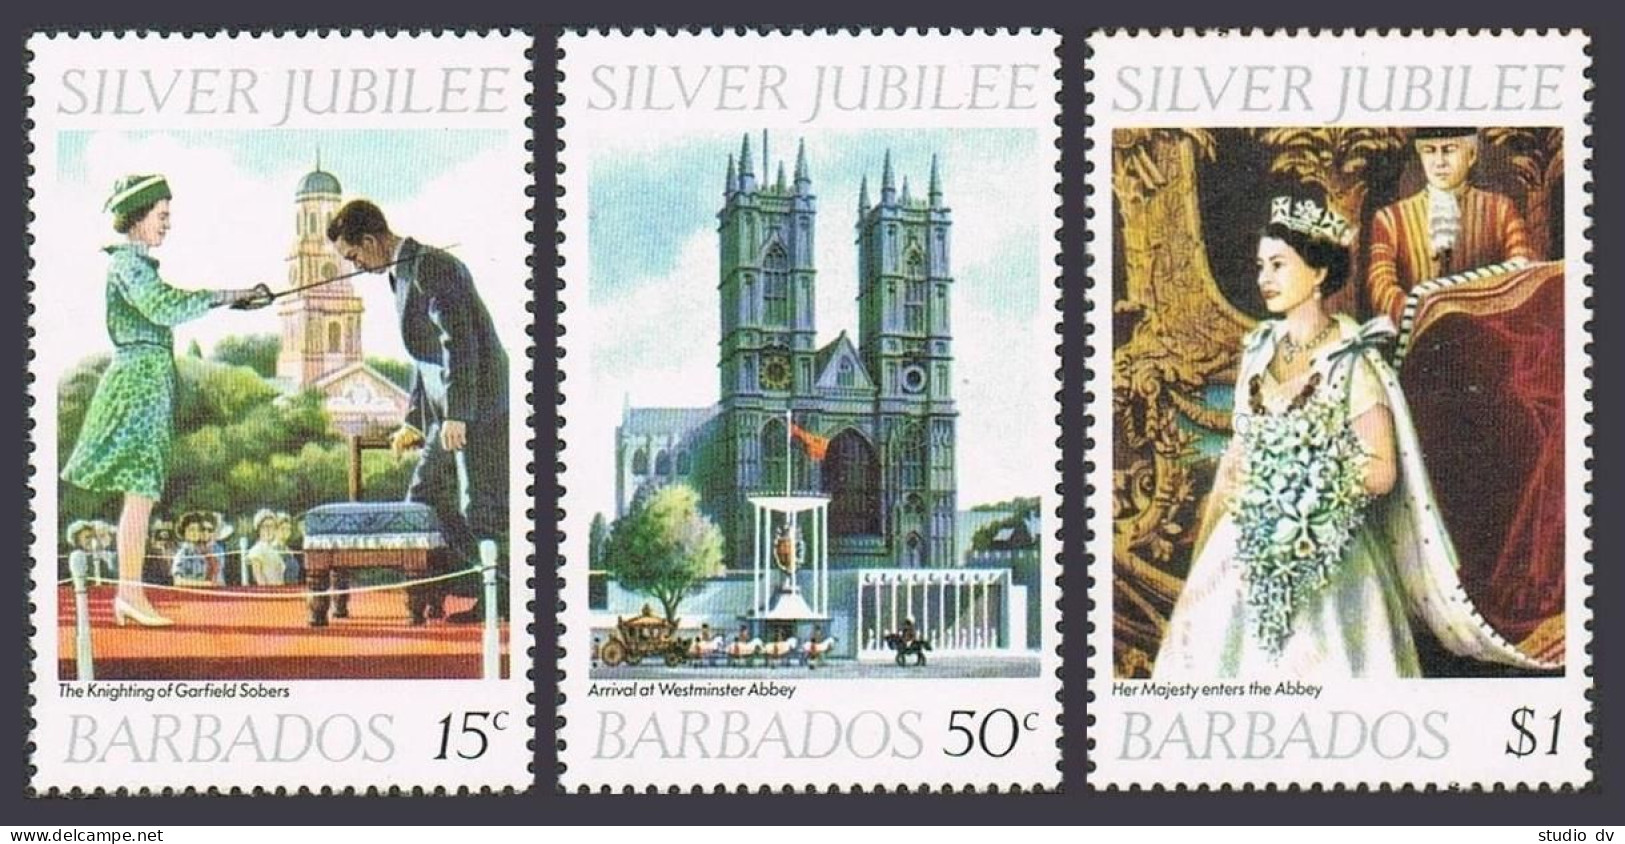 Barbados 452-454,MNH.Michel 417-419. Reign Of QE II,25,1977.Westminster Abbey. - Barbades (1966-...)